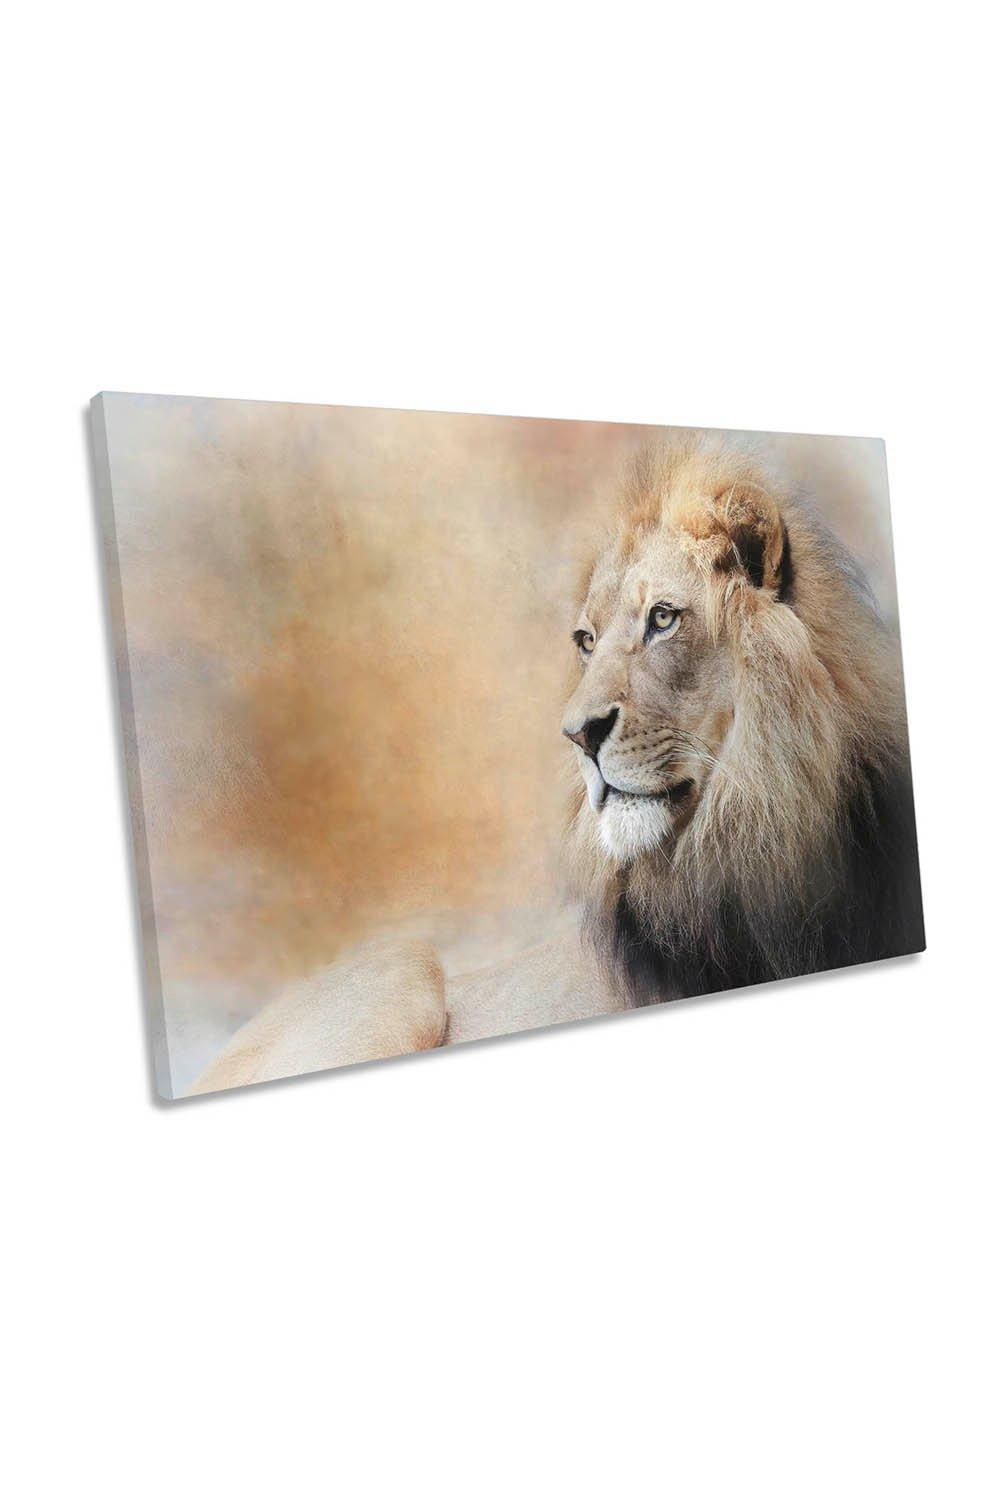 In Deep Thought Lion Canvas Wall Art Picture Print